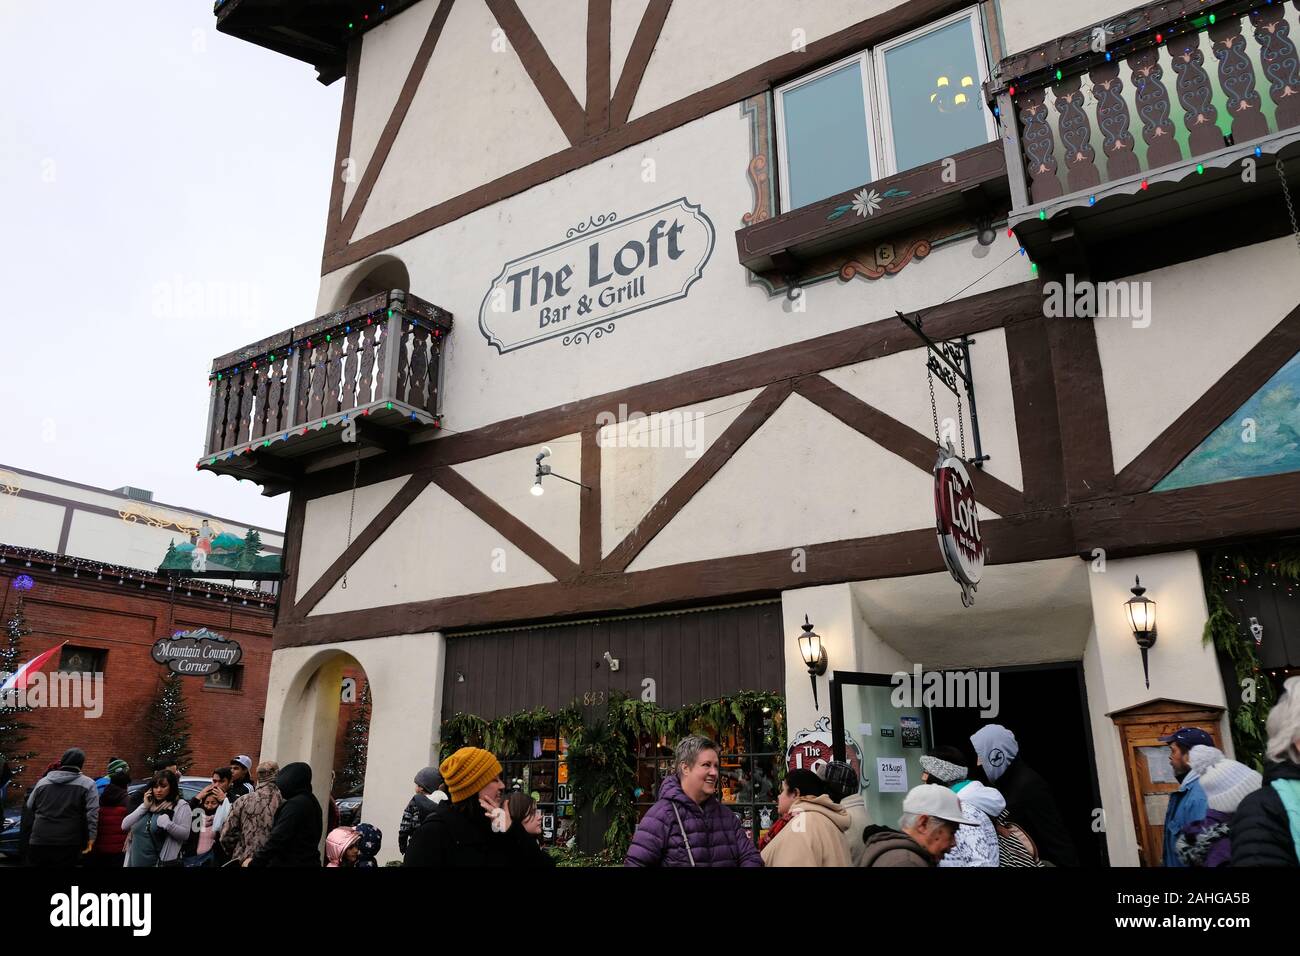 Exterior view of The Loft Bar & Grill in Leavenworth, Washington, USA with town visitors walking by on a cold winter day. Stock Photo